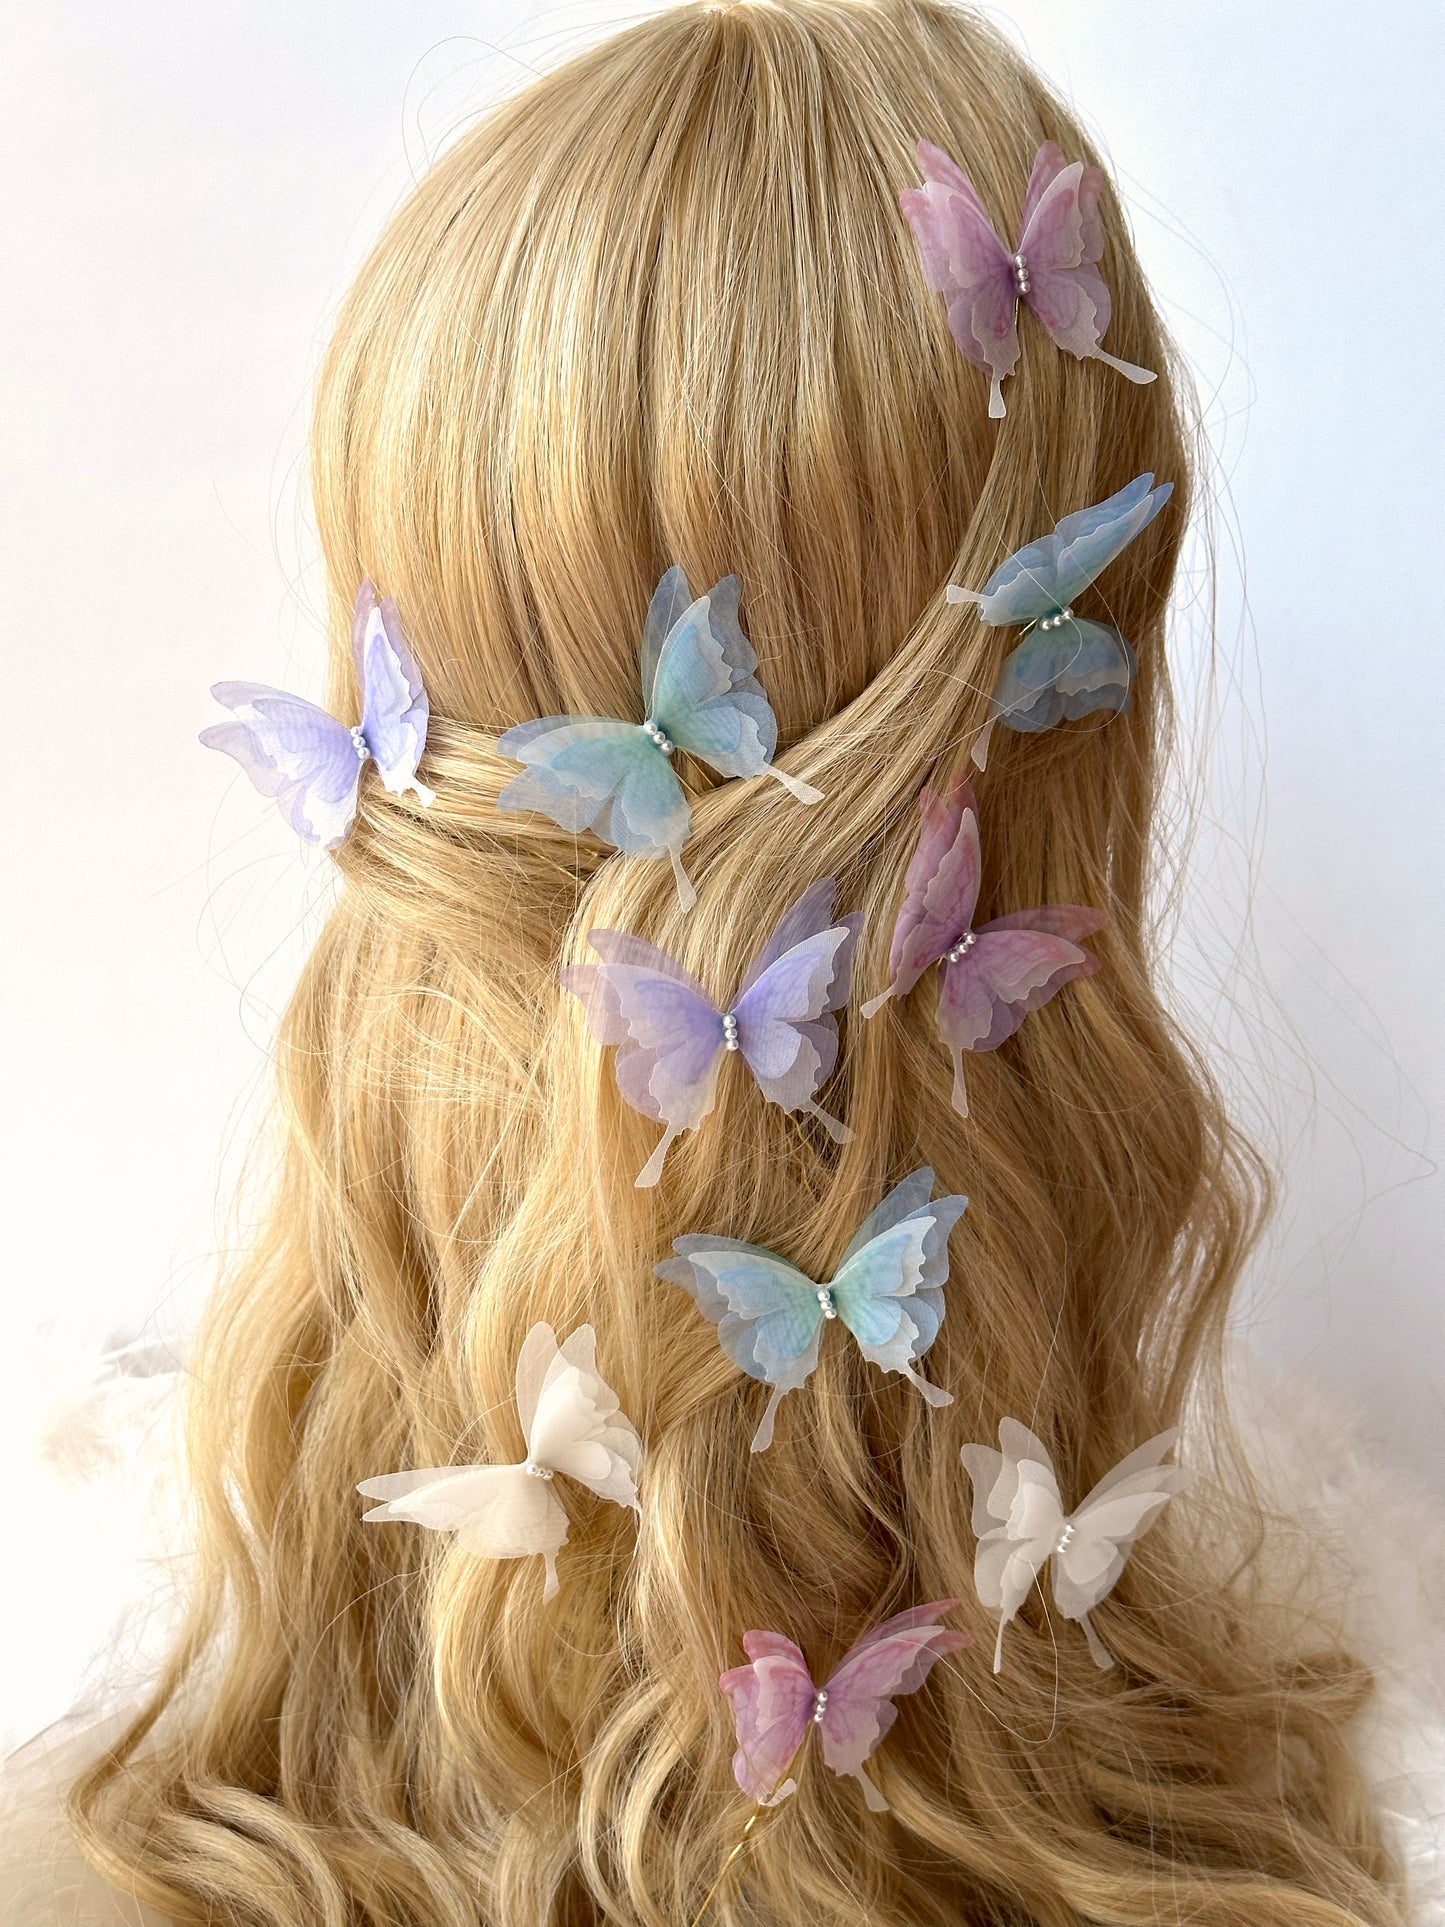 Floral hair pins with fluttering butterfly details